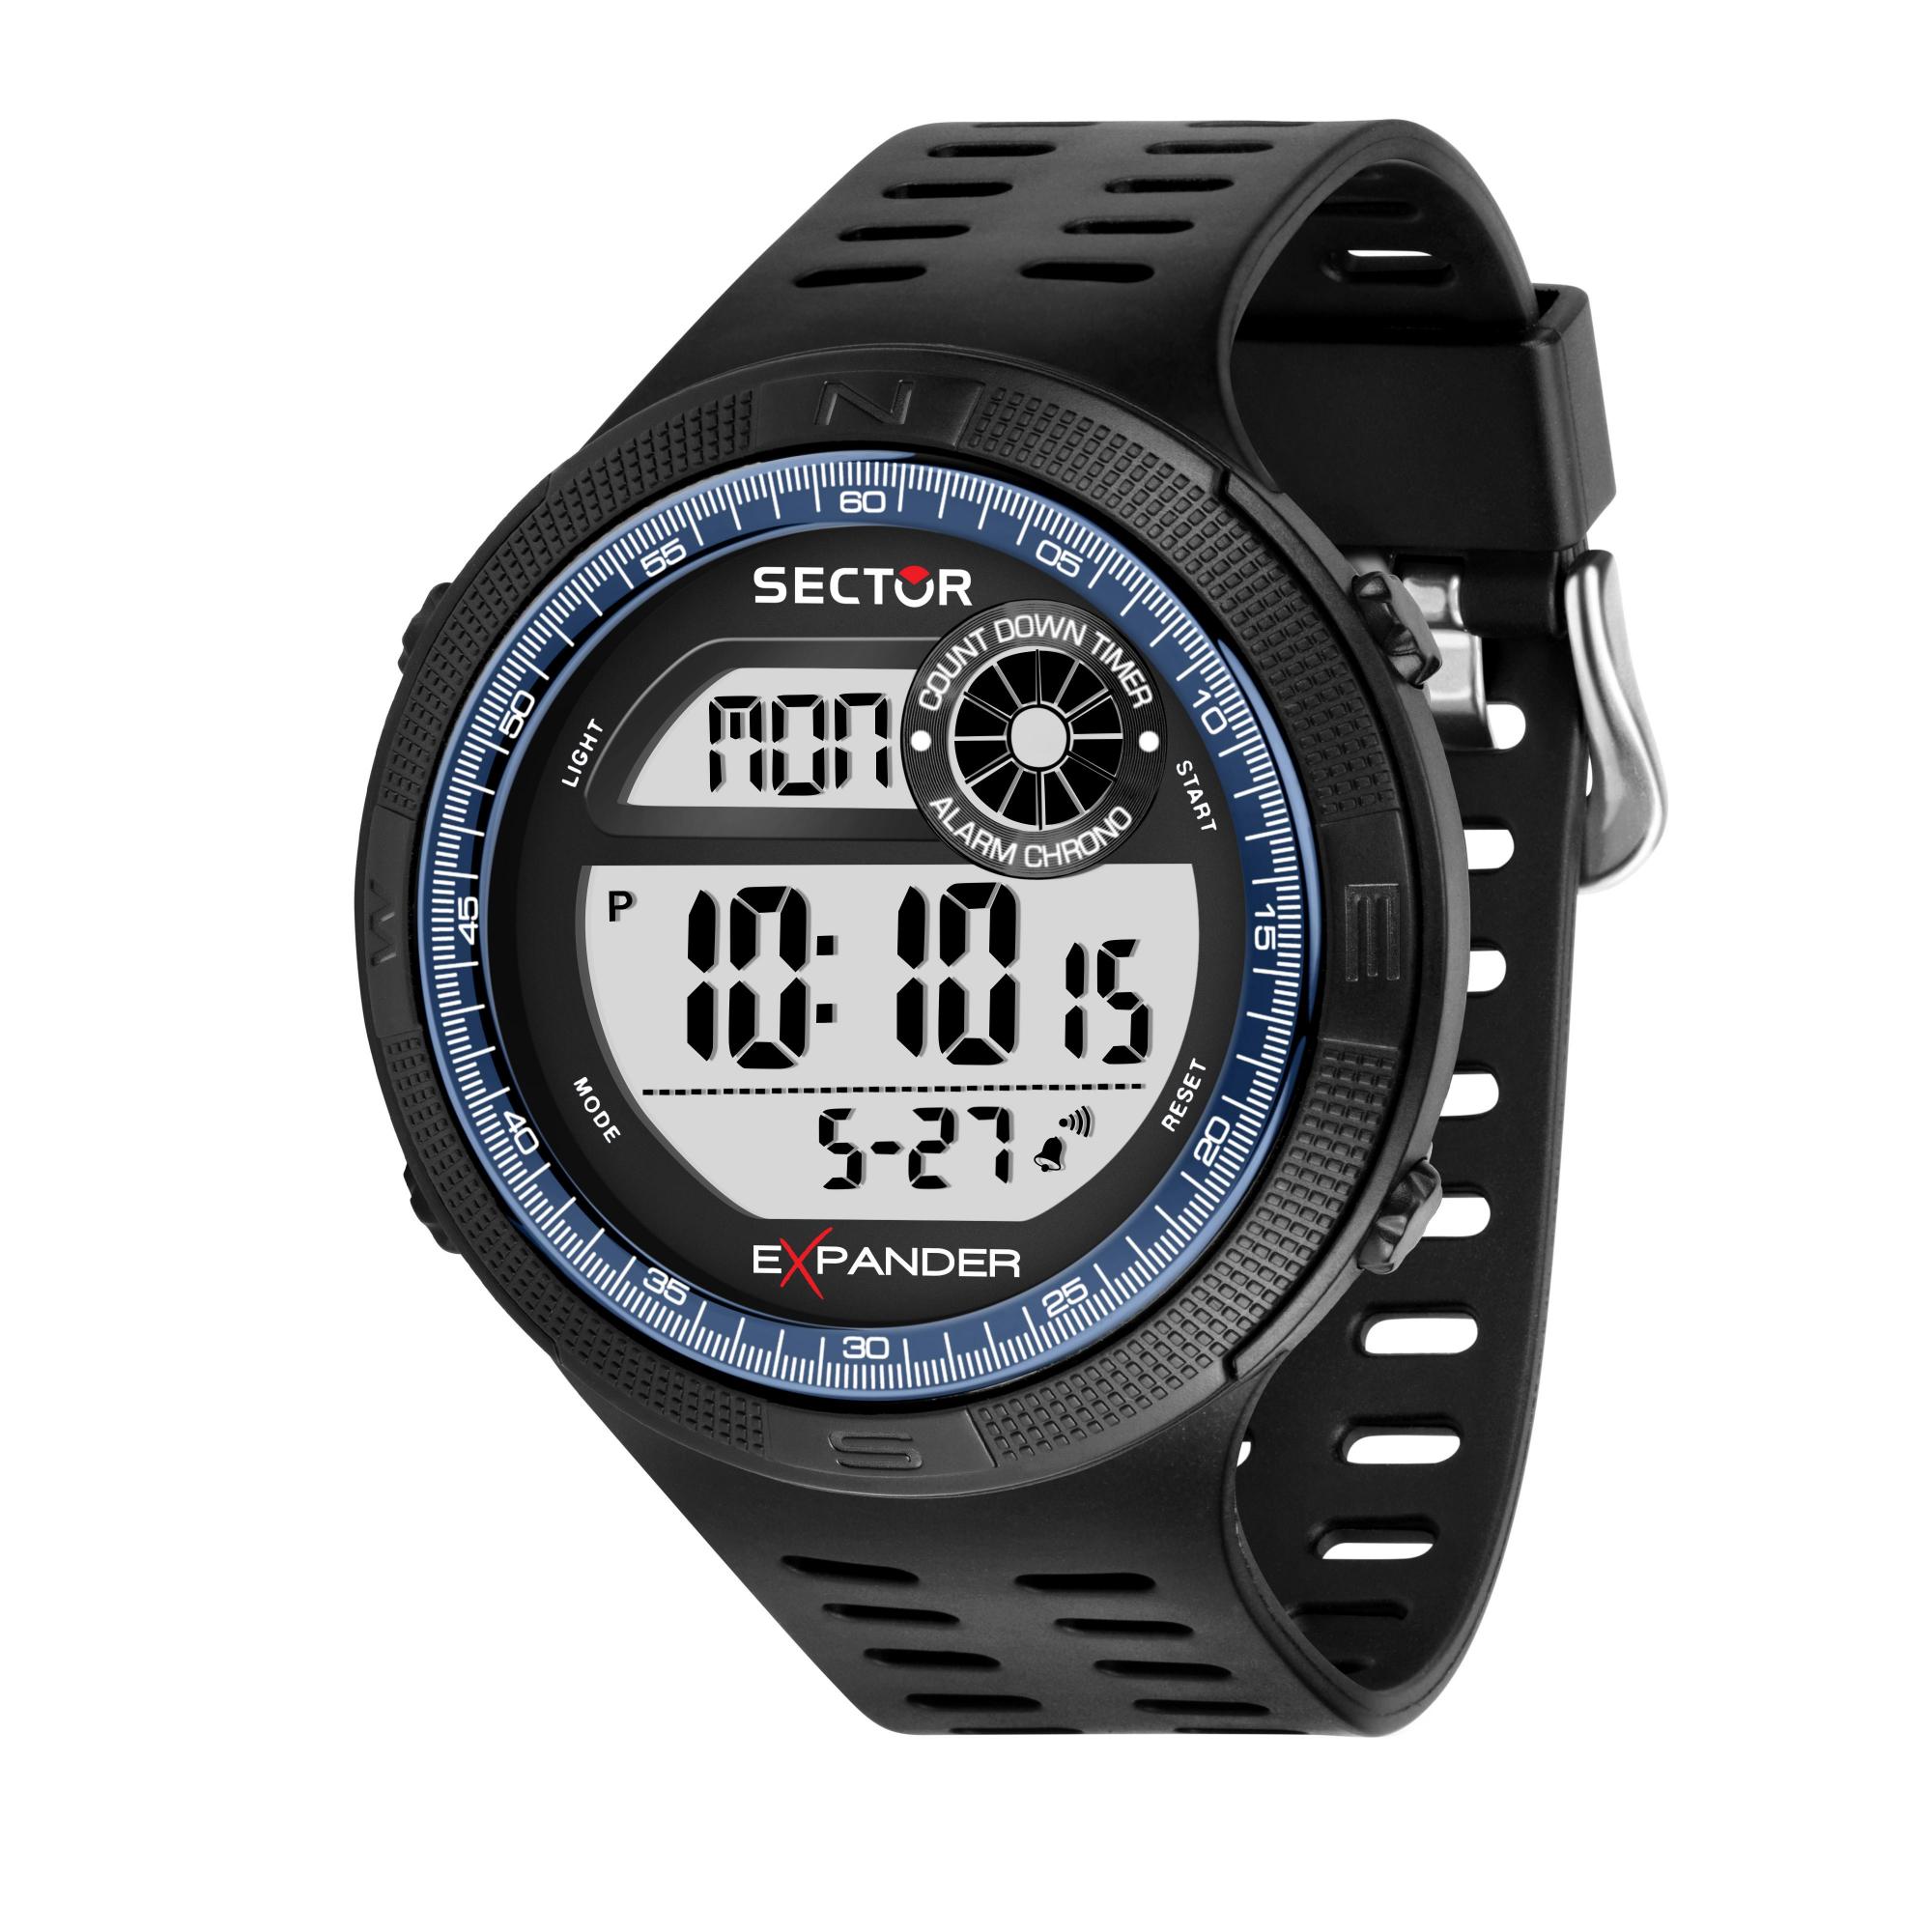 Orologio Digitale Lowell Inter Official P-IN450UB1 Gent